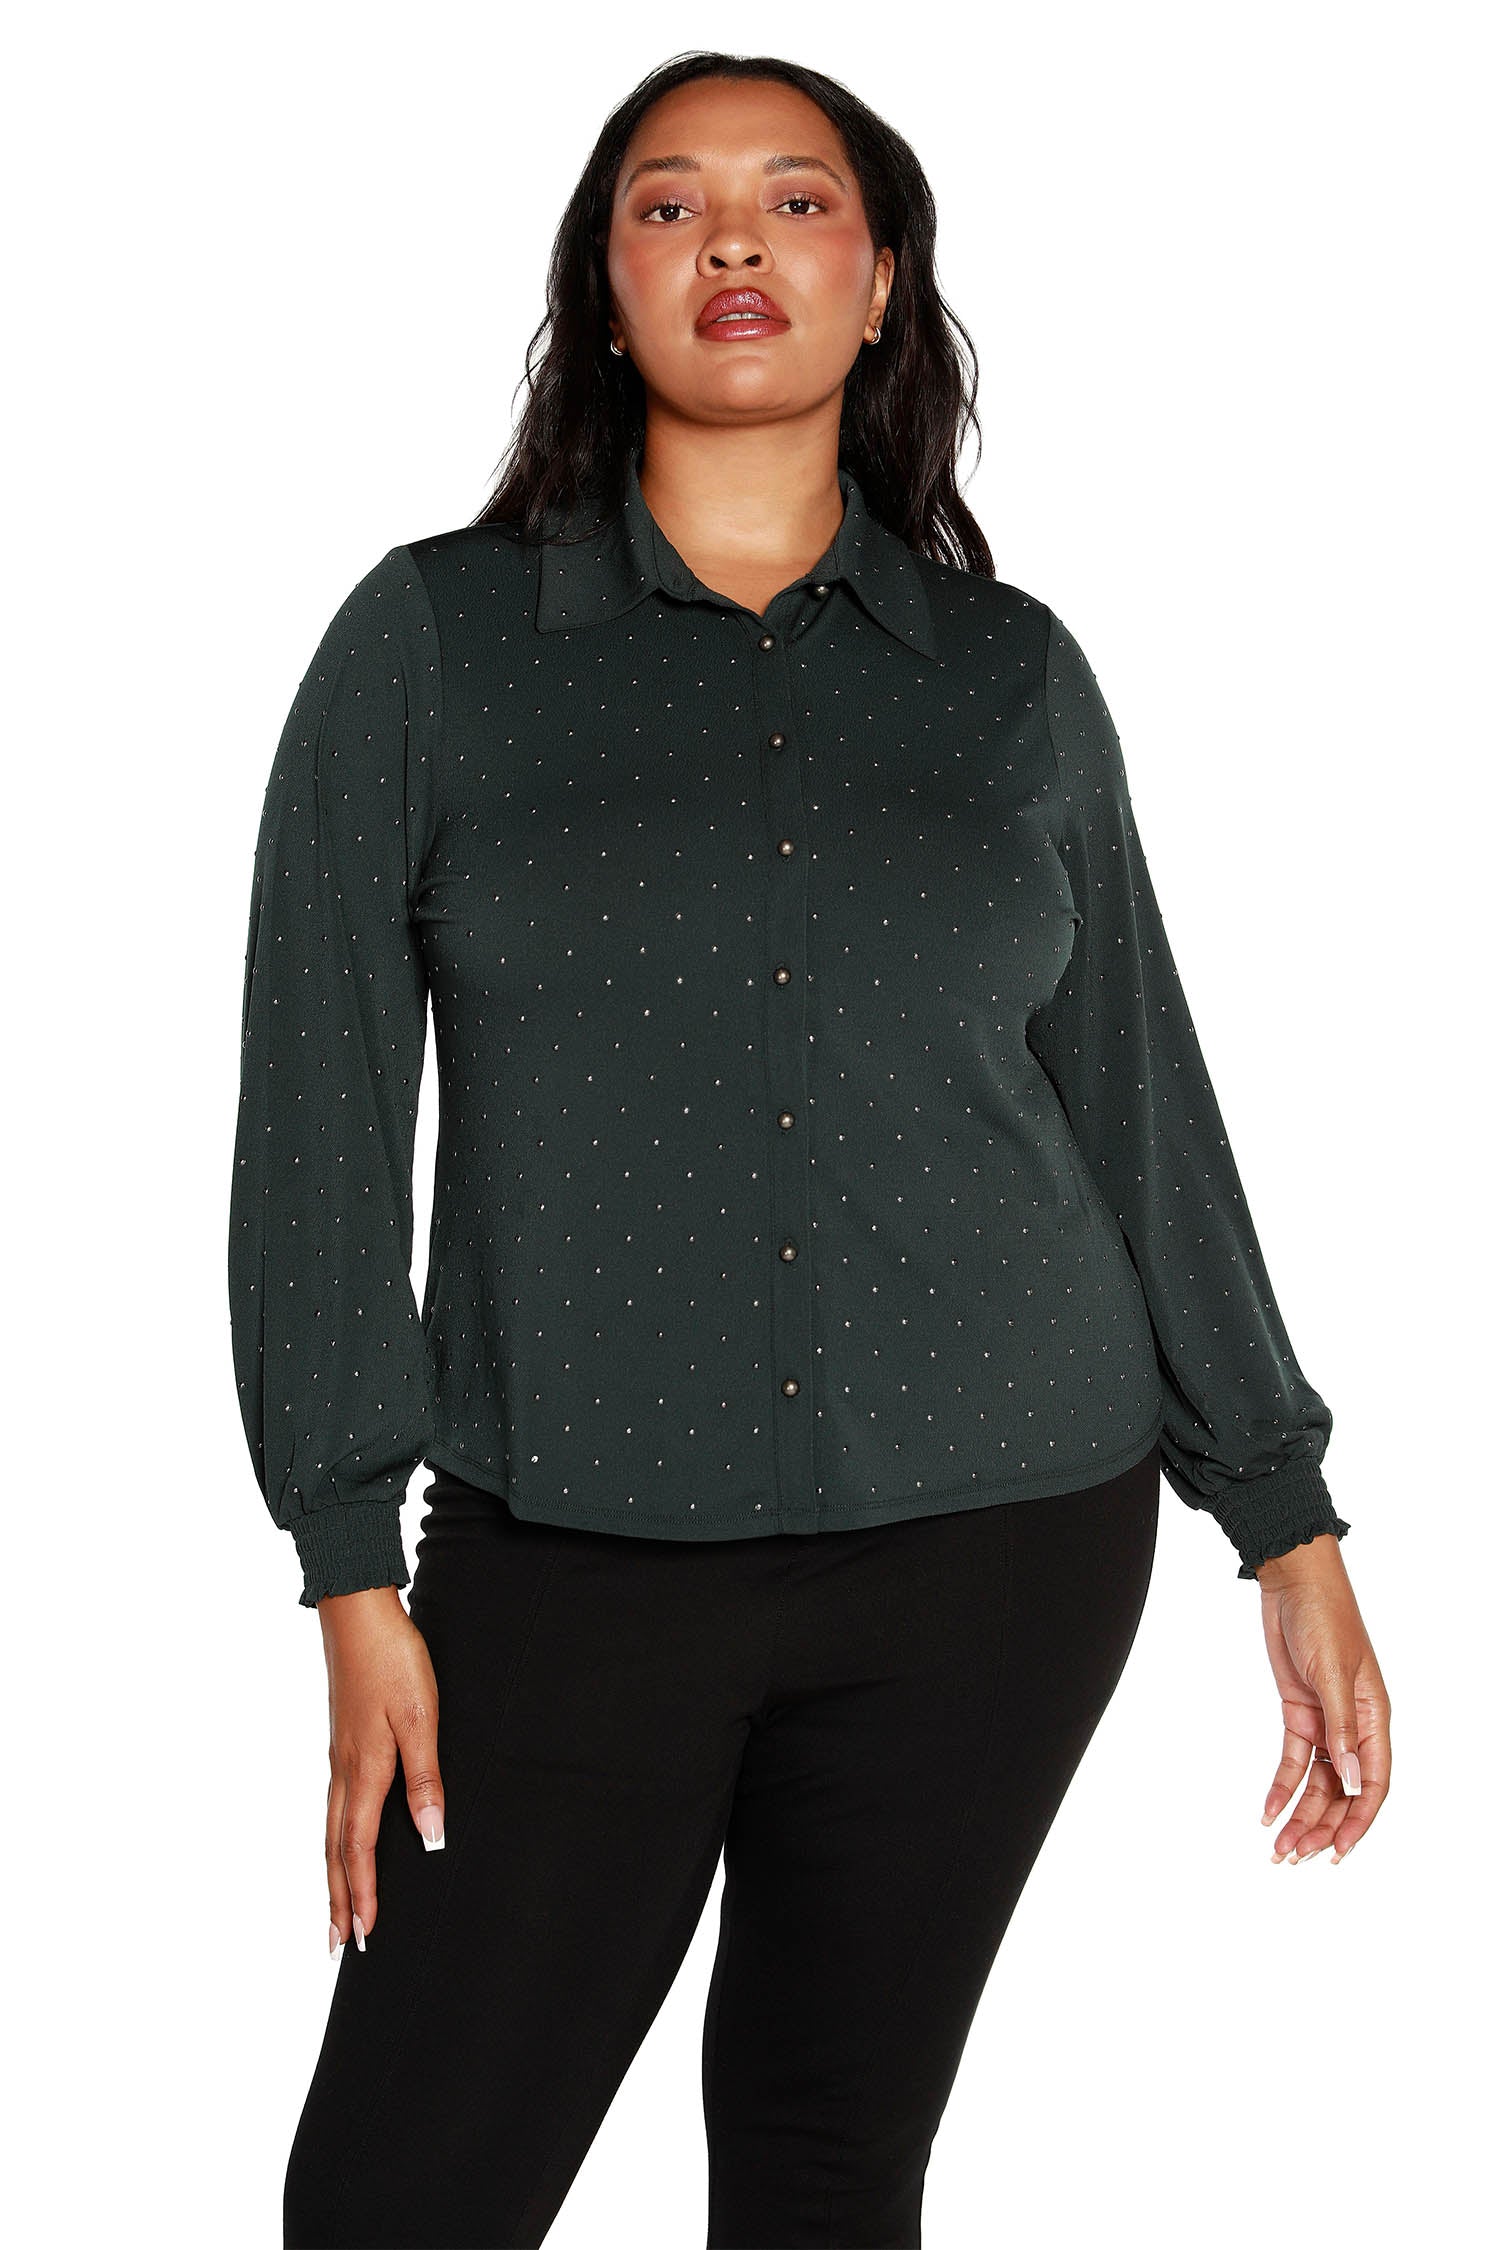 Women's Button Front Blouse with Long Blouson Sleeves in a Metallic Gel Print Jersey | Curvy